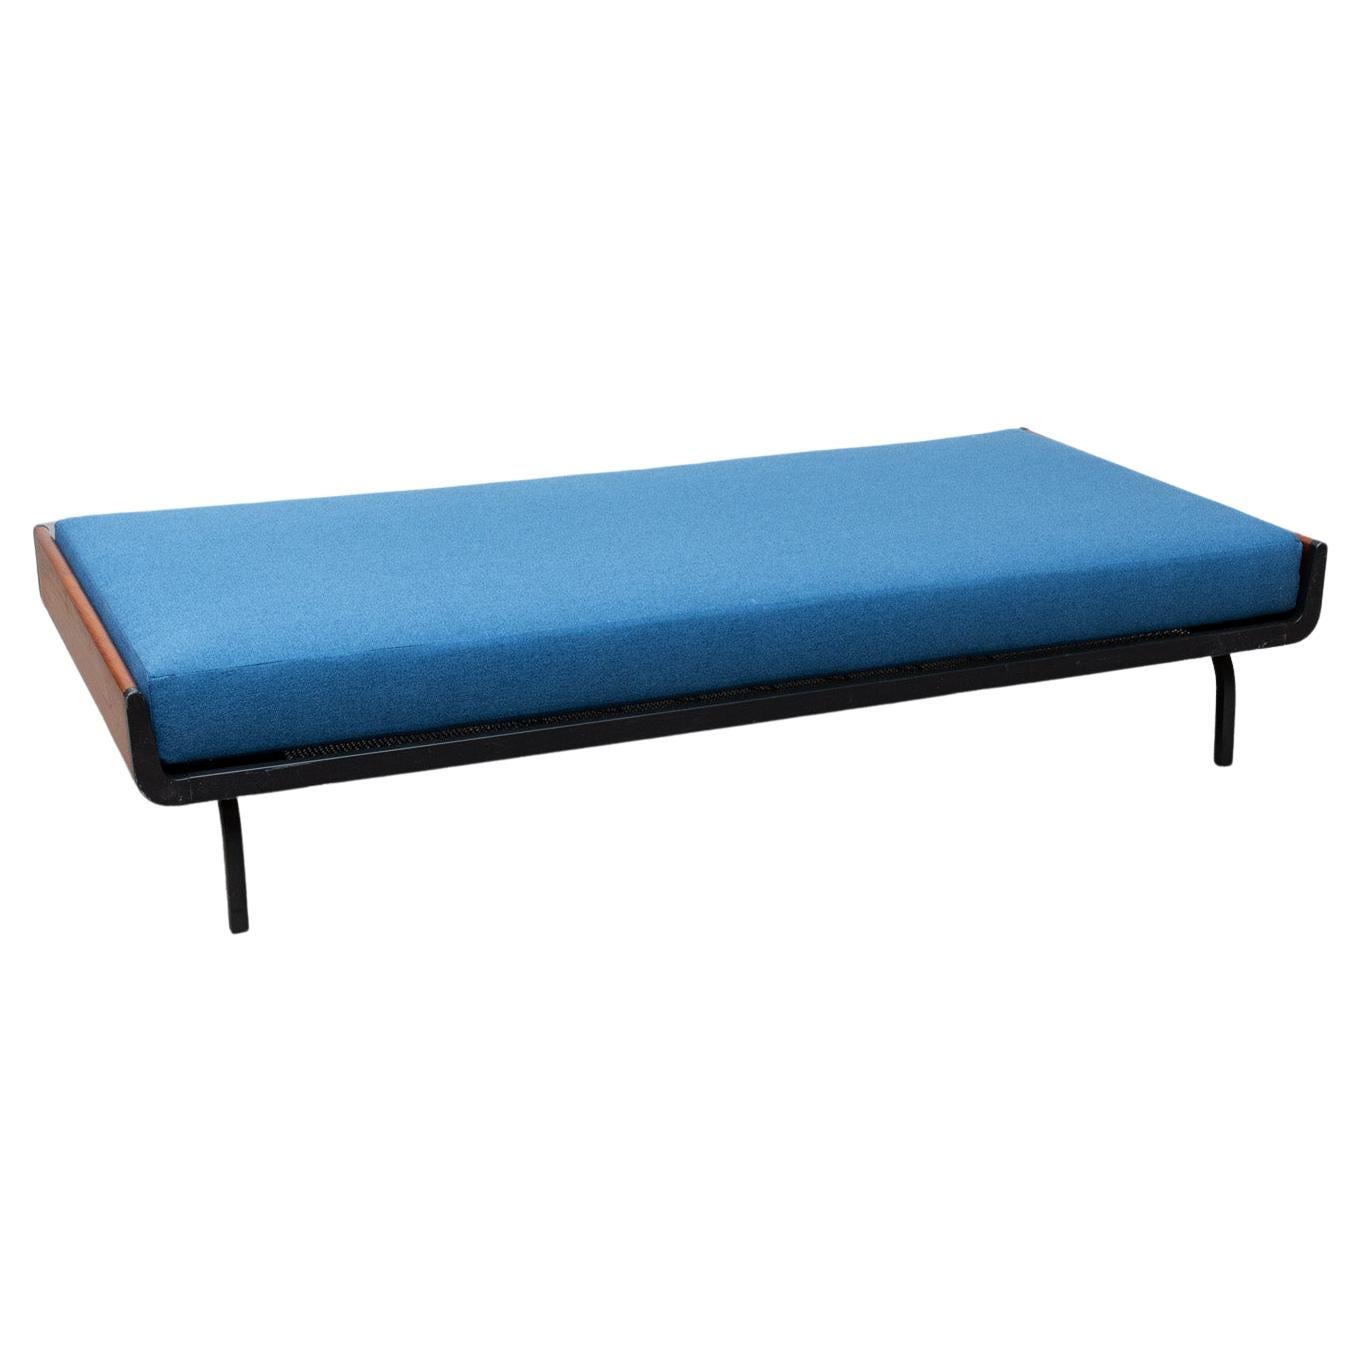 Friso Kramer Style Auping Day Bed with Bright Blue Mattress